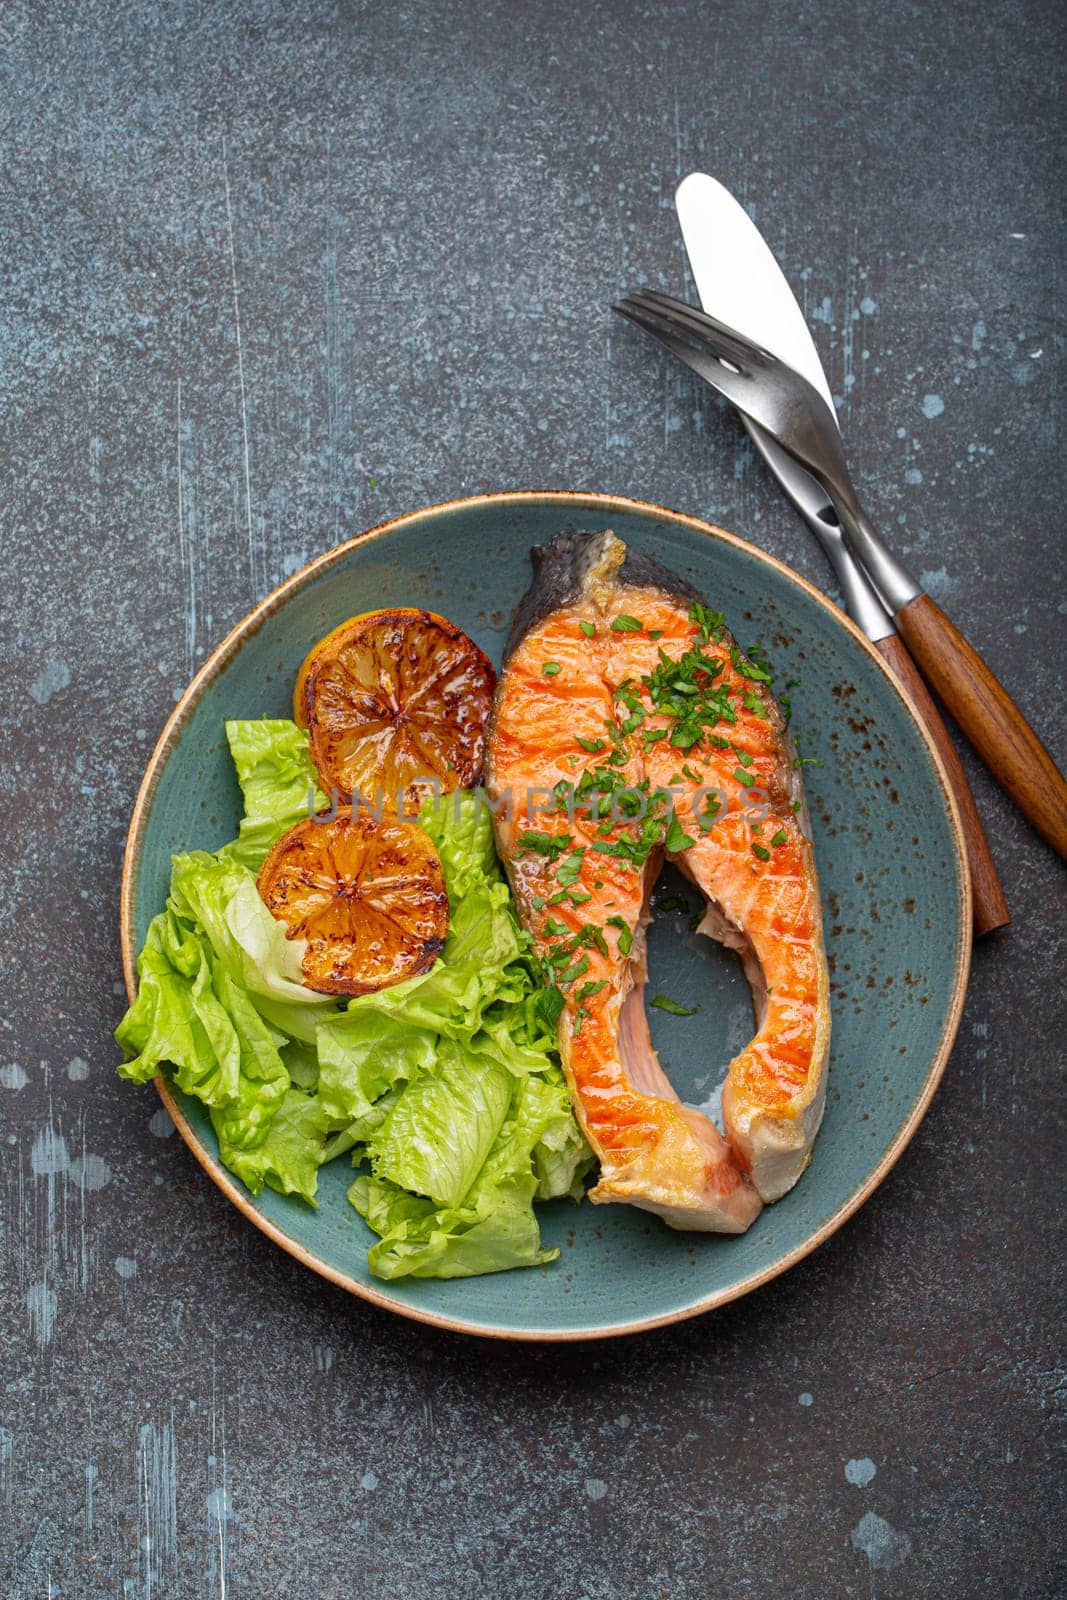 Grilled fish salmon steak and green salad with lemon on ceramic plate on rustic blue stone background top view, balanced diet or healthy nutrition meal with salmon and veggies.